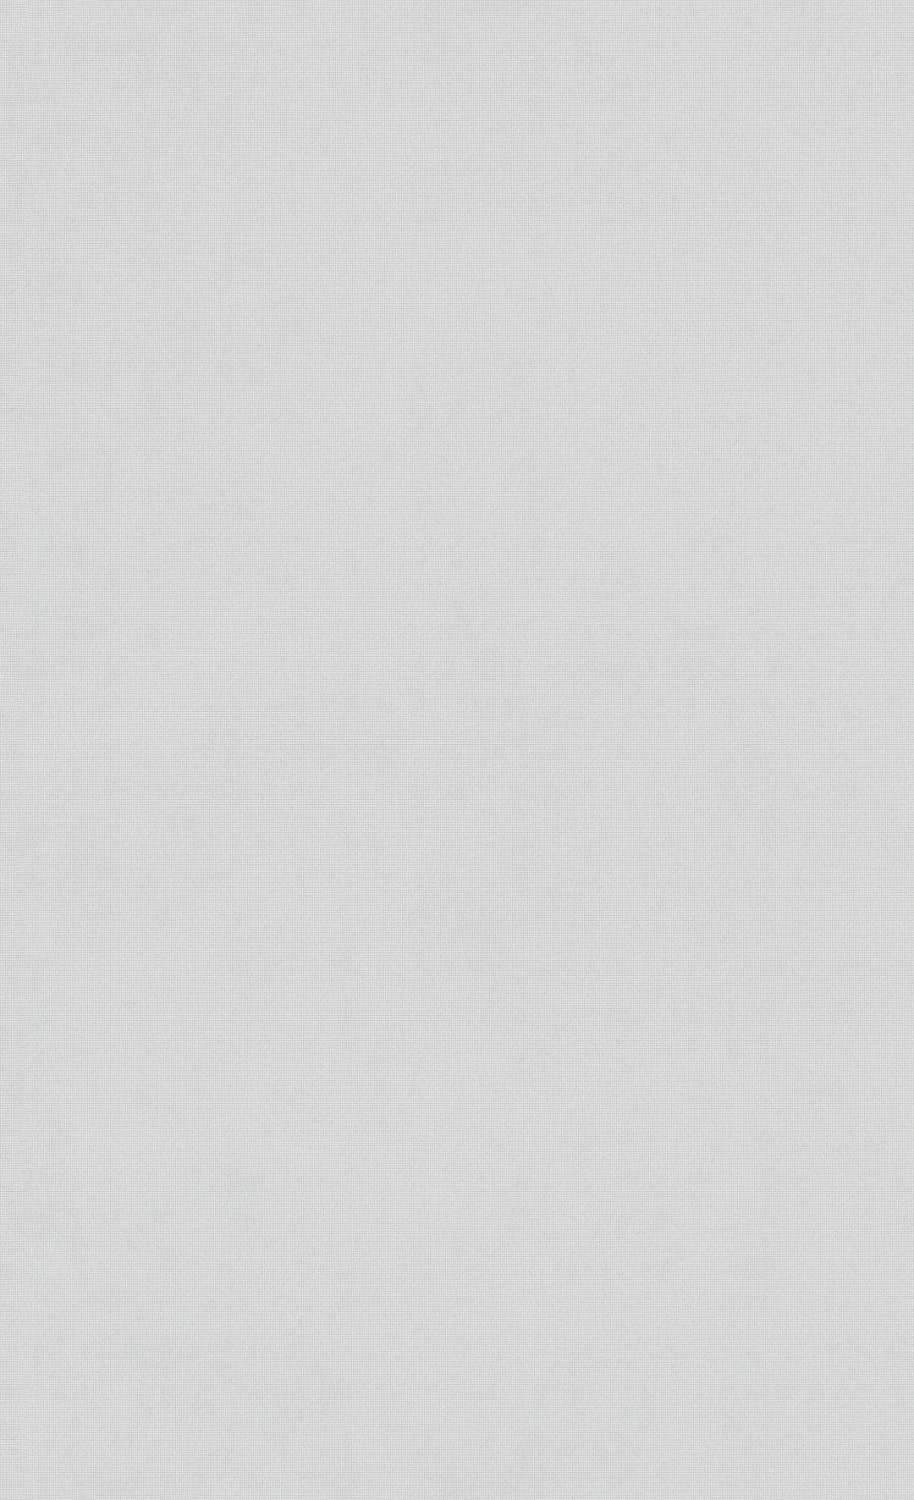 Light Gray Minimalist Wallpaper C7279. Commercial and Hospitality